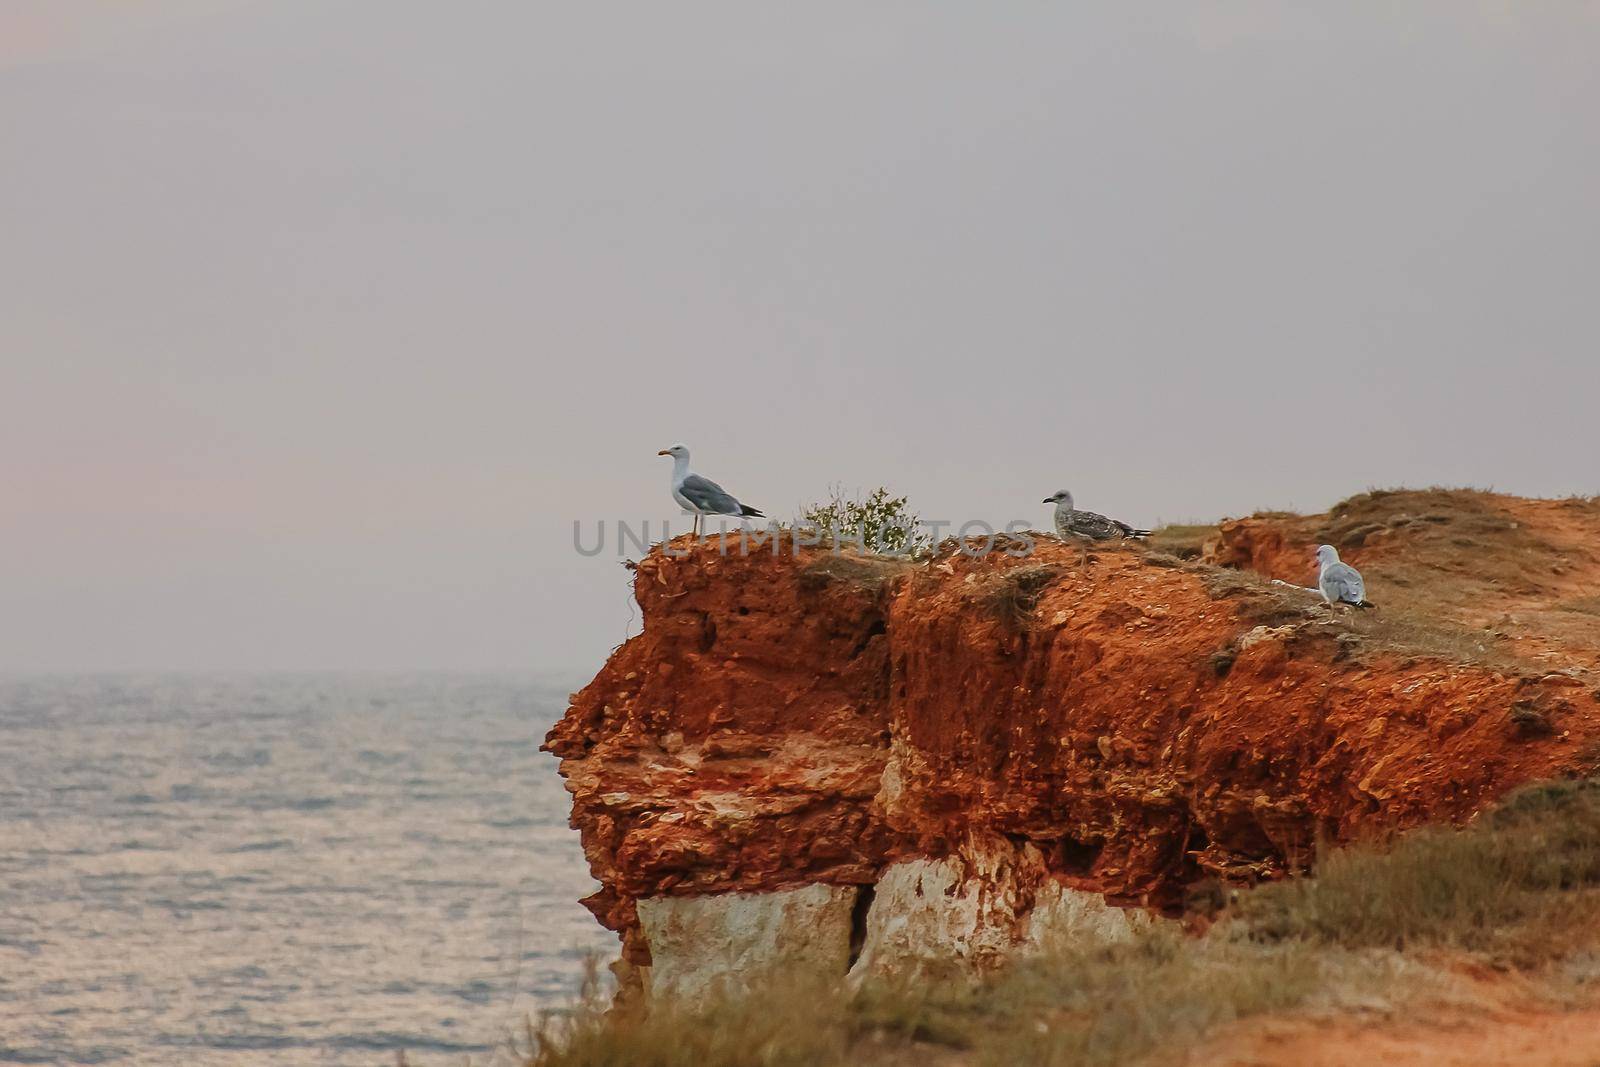 A group of wild seagulls on the rock over the ocean or sea.